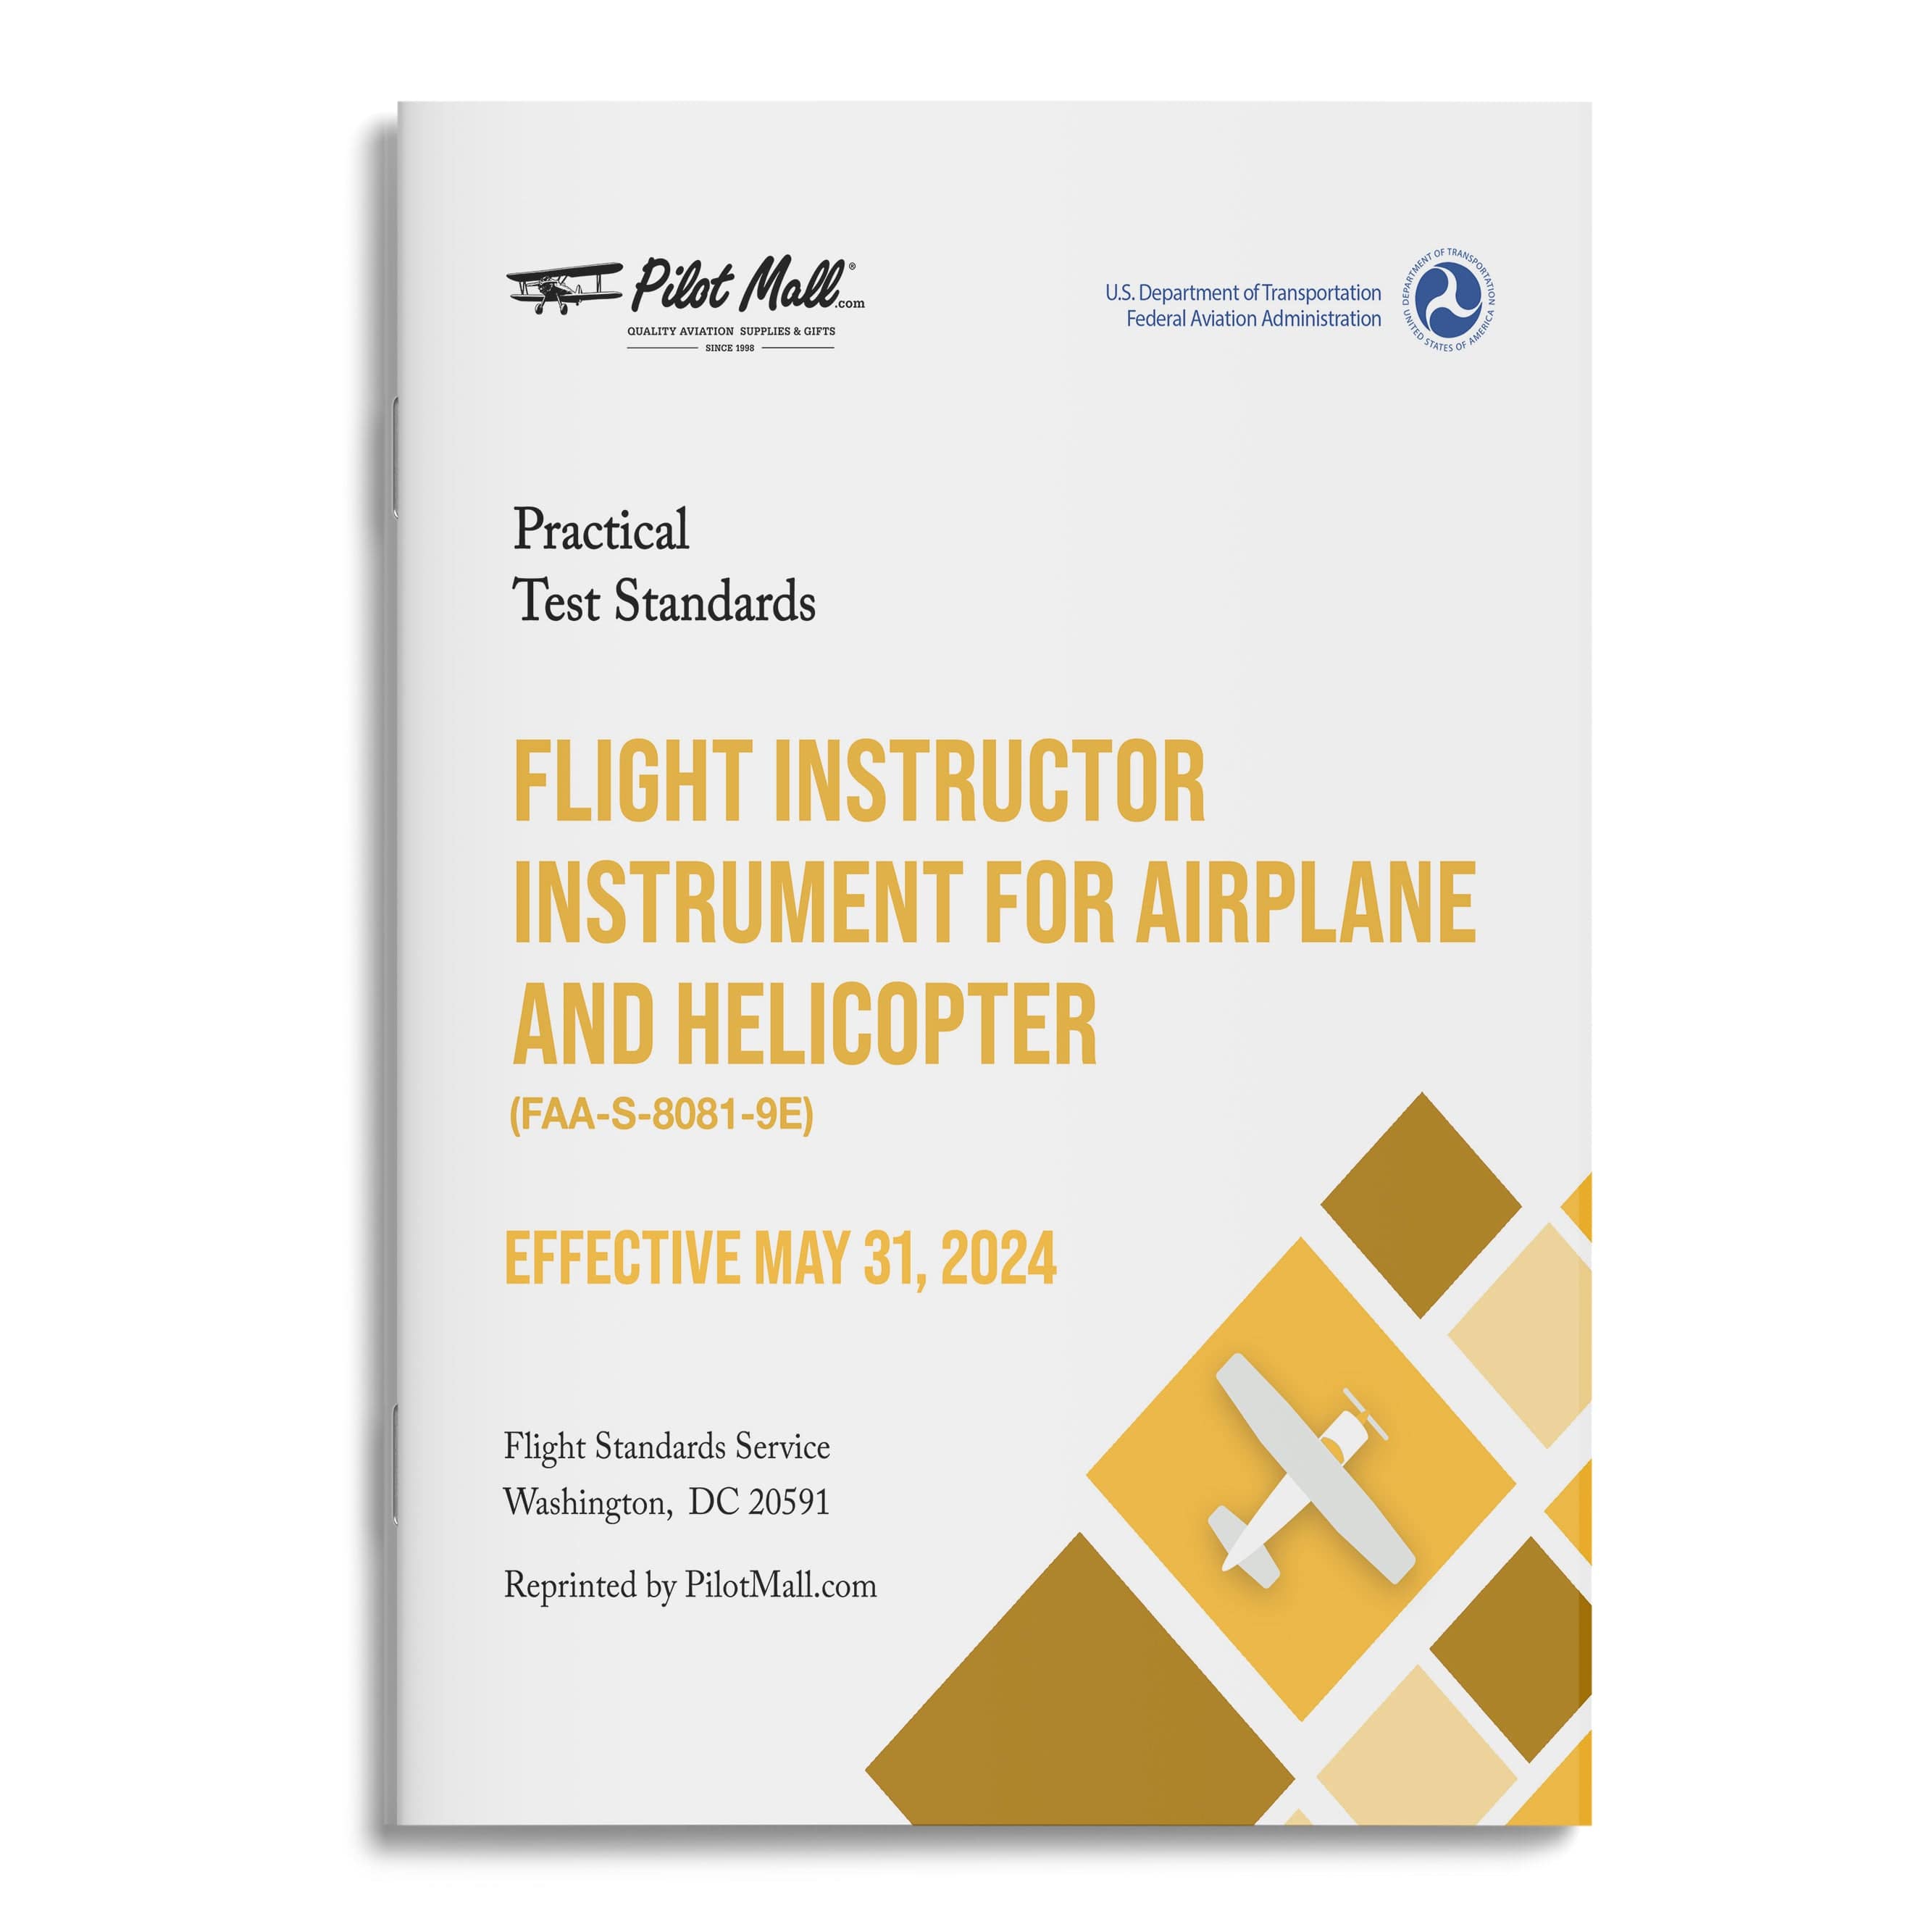 Practical Test Standards - Flight Instructor Instrument for Airplane Rating and Helicopter Rating: (FAA-S-8081-9E)-Certified Flight Instructor-PilotMall.com-PilotMall.com